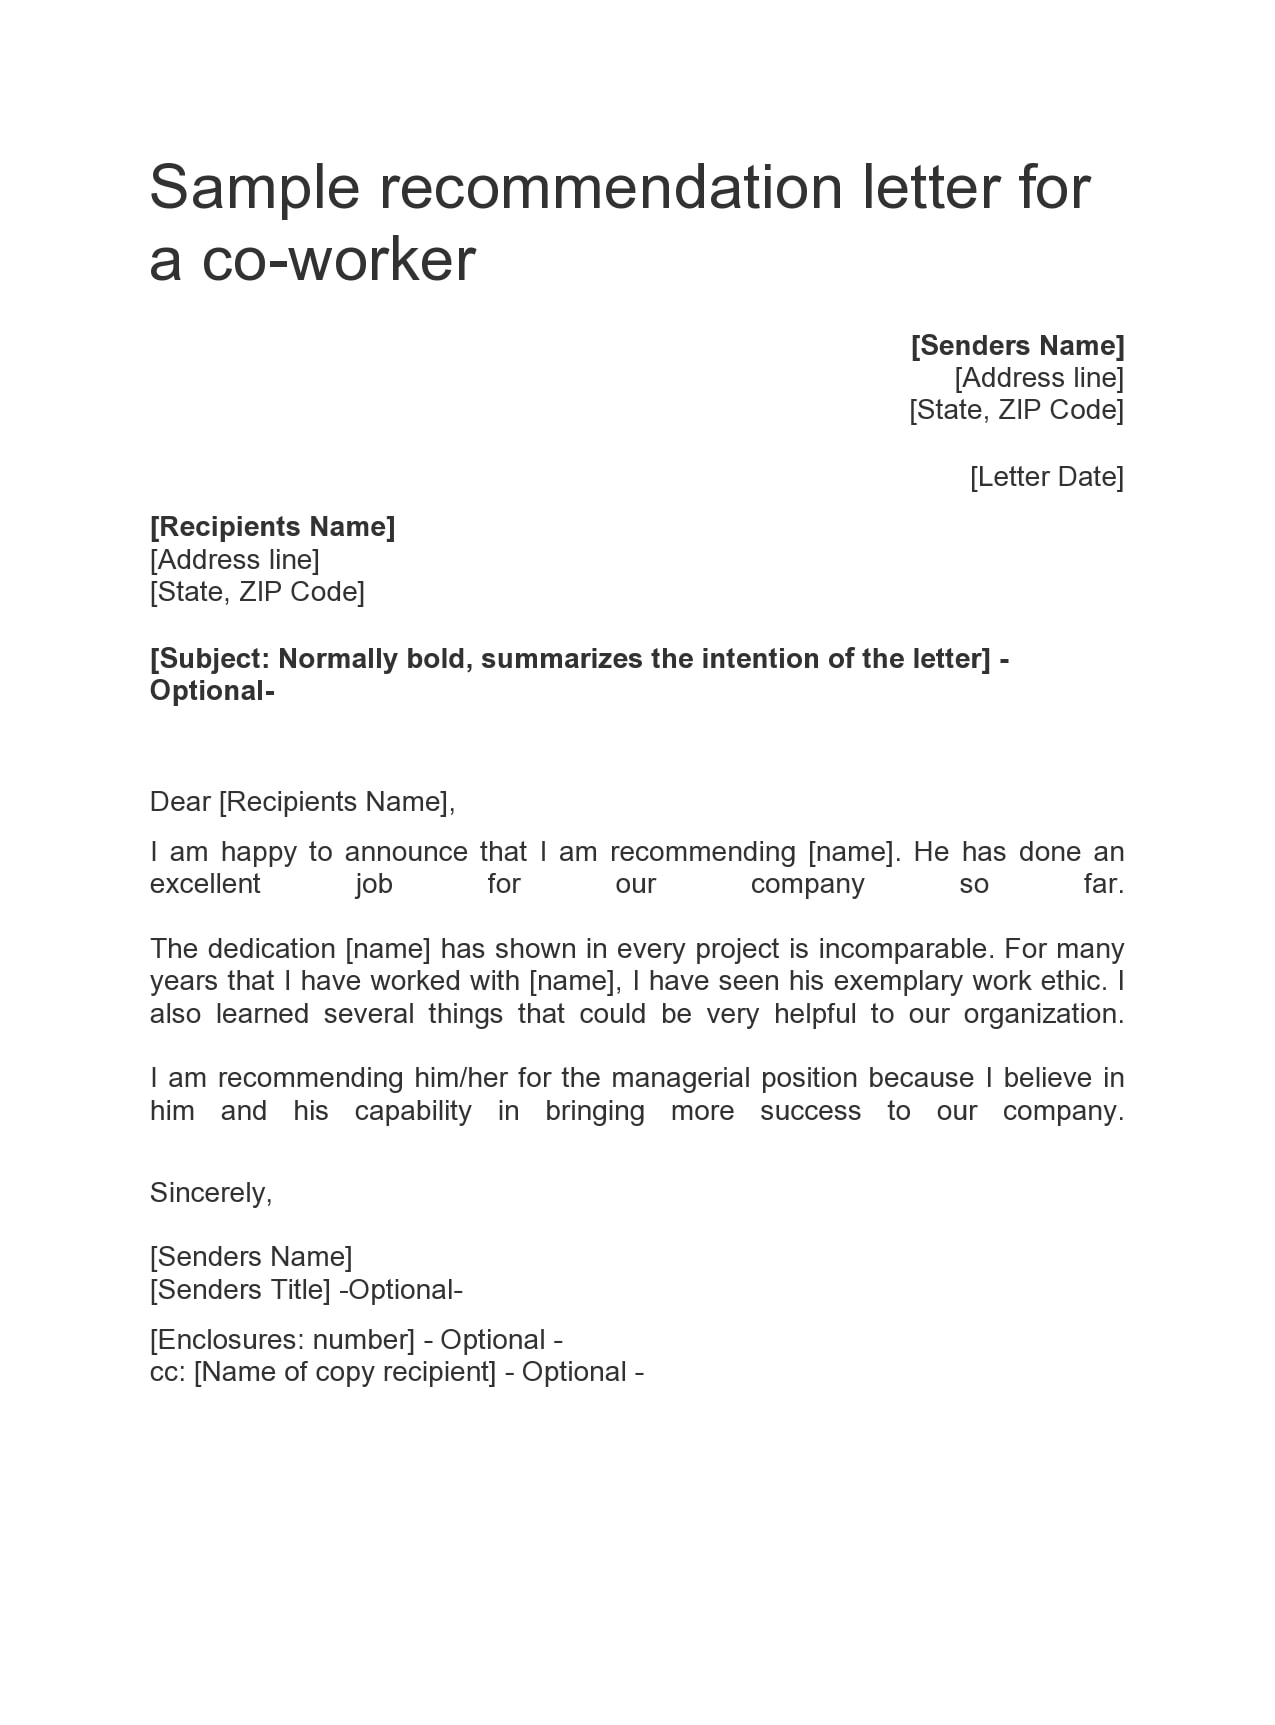 Sample Recommendation Letter For Employee from templatearchive.com